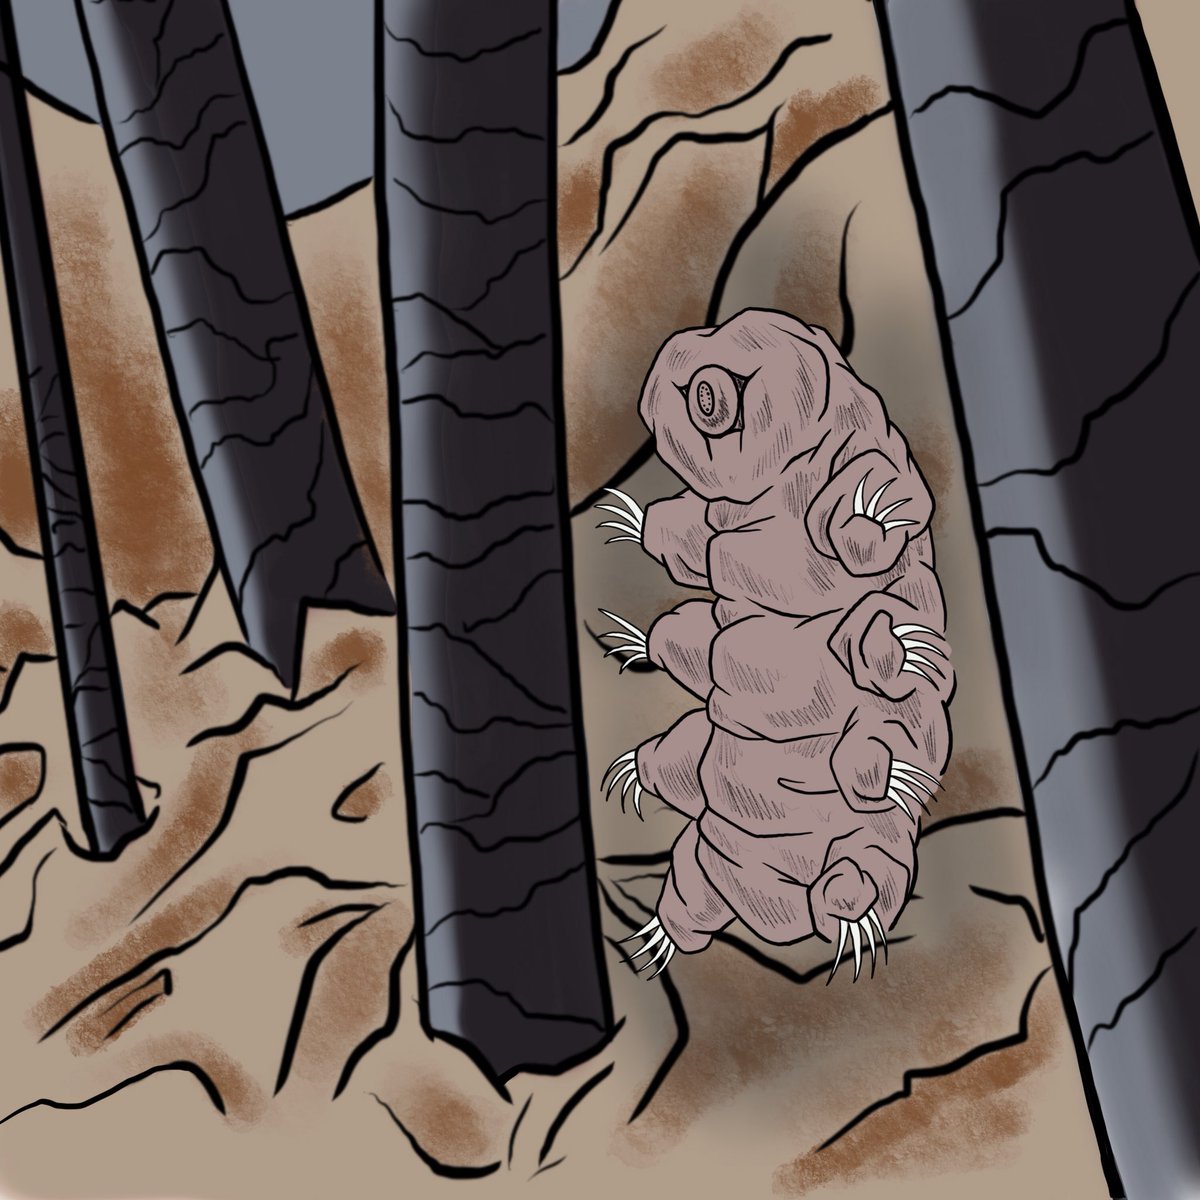 painting of a tardigrade standing with limbs outstretched